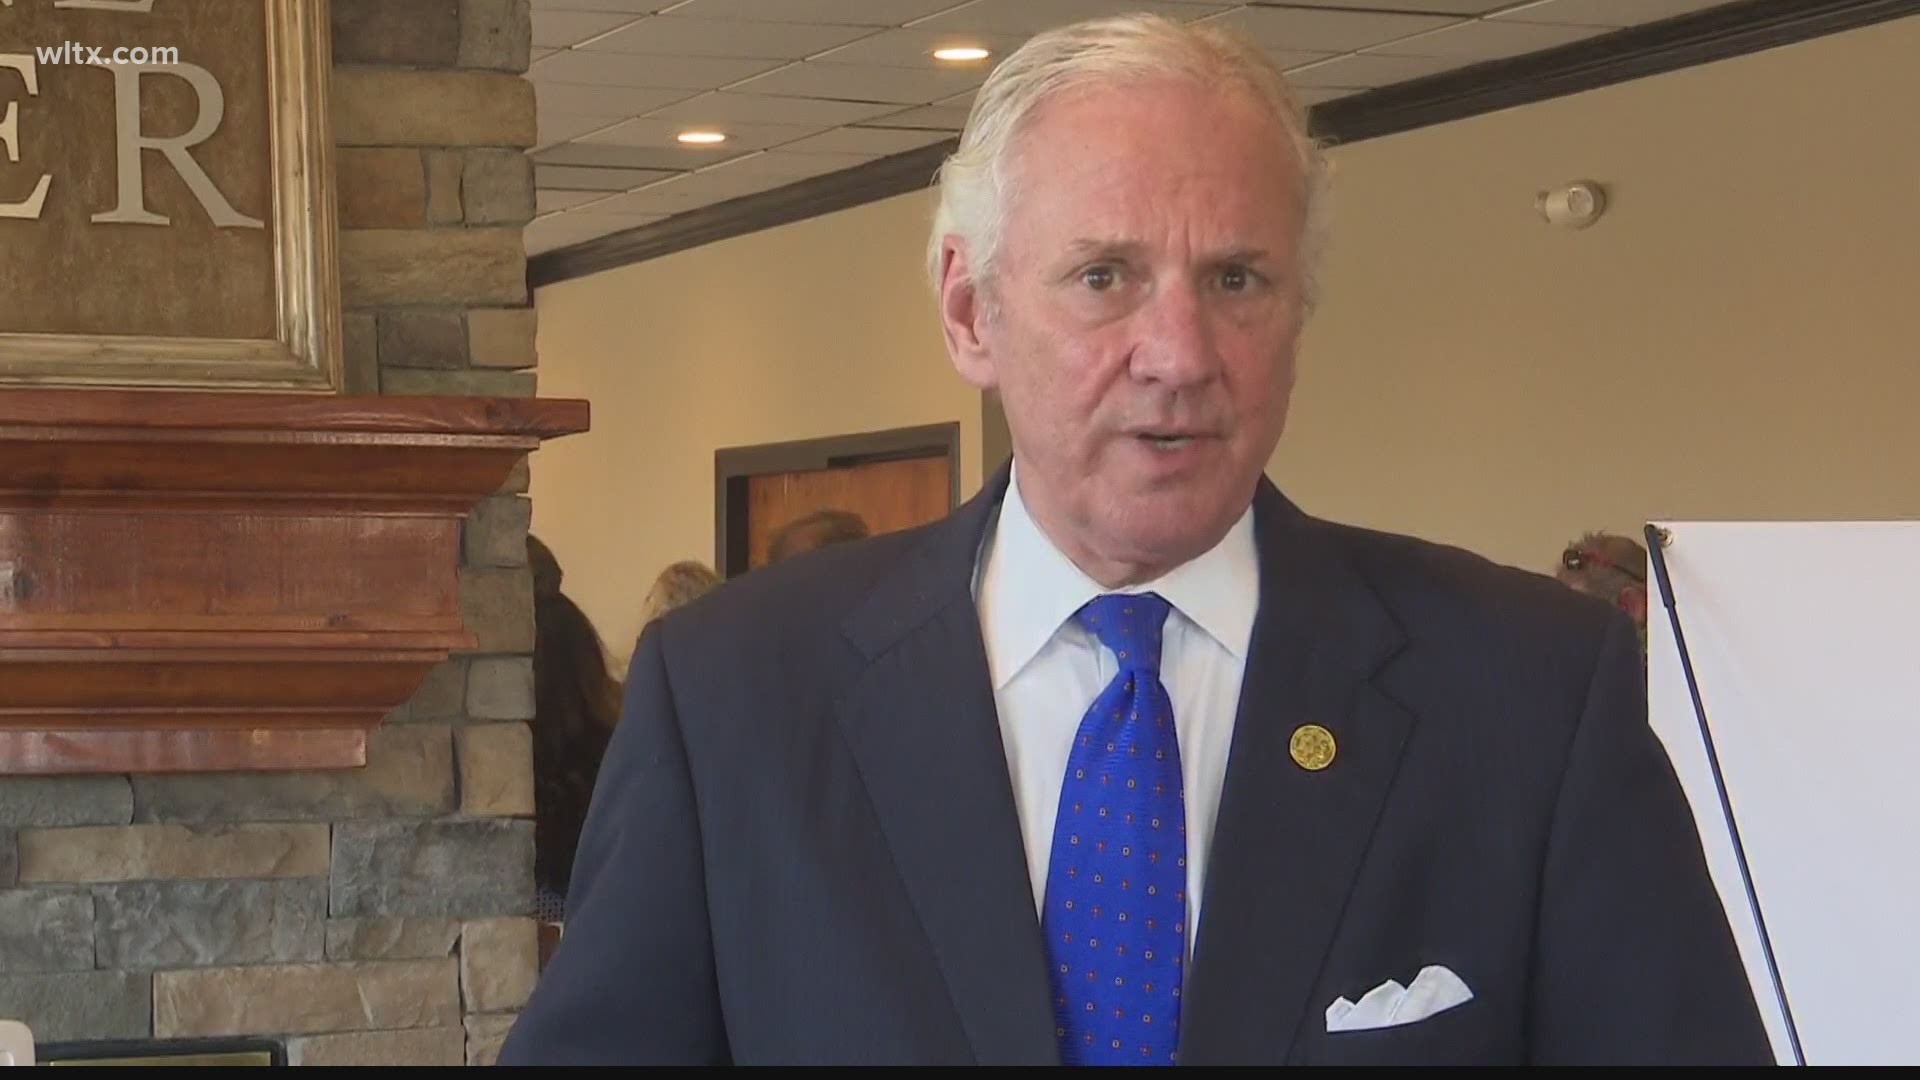 The governor says it wouldn't be right for a younger, healthier person to get the vaccine before someone older.